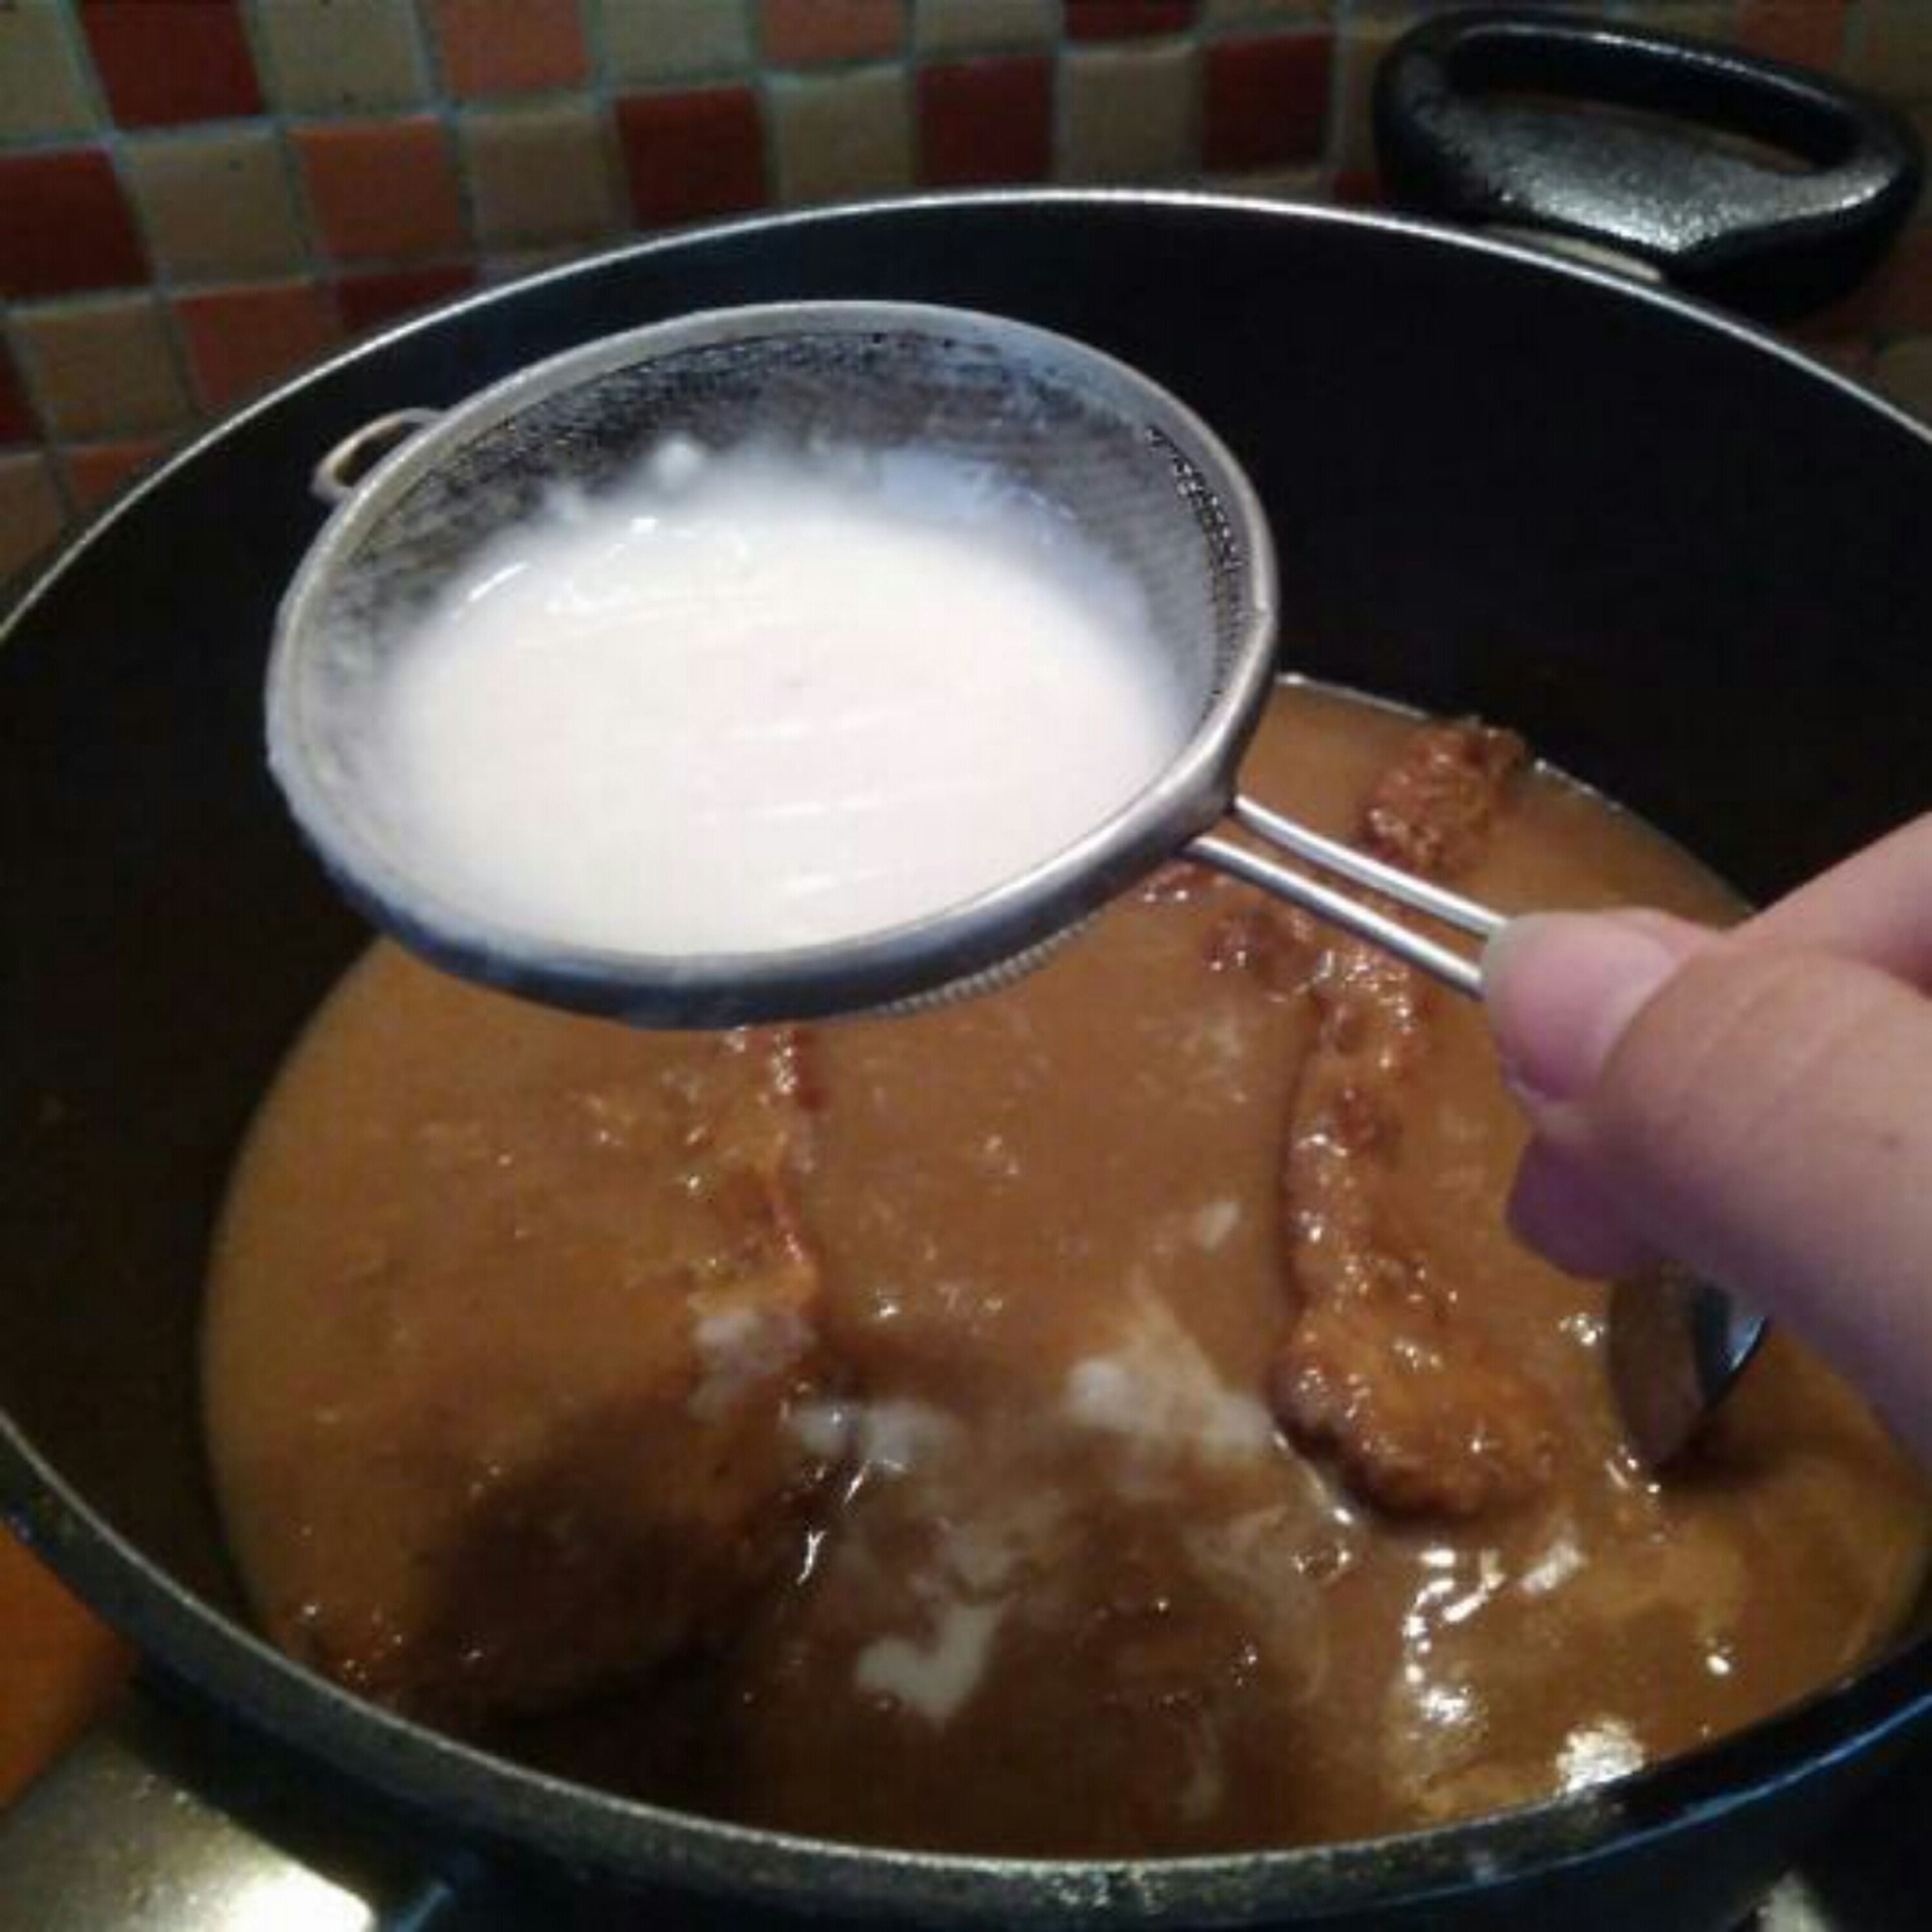 And add the teat (= mix a smooth flour in a glass of warm water and pour it into the sauce through a sieve).